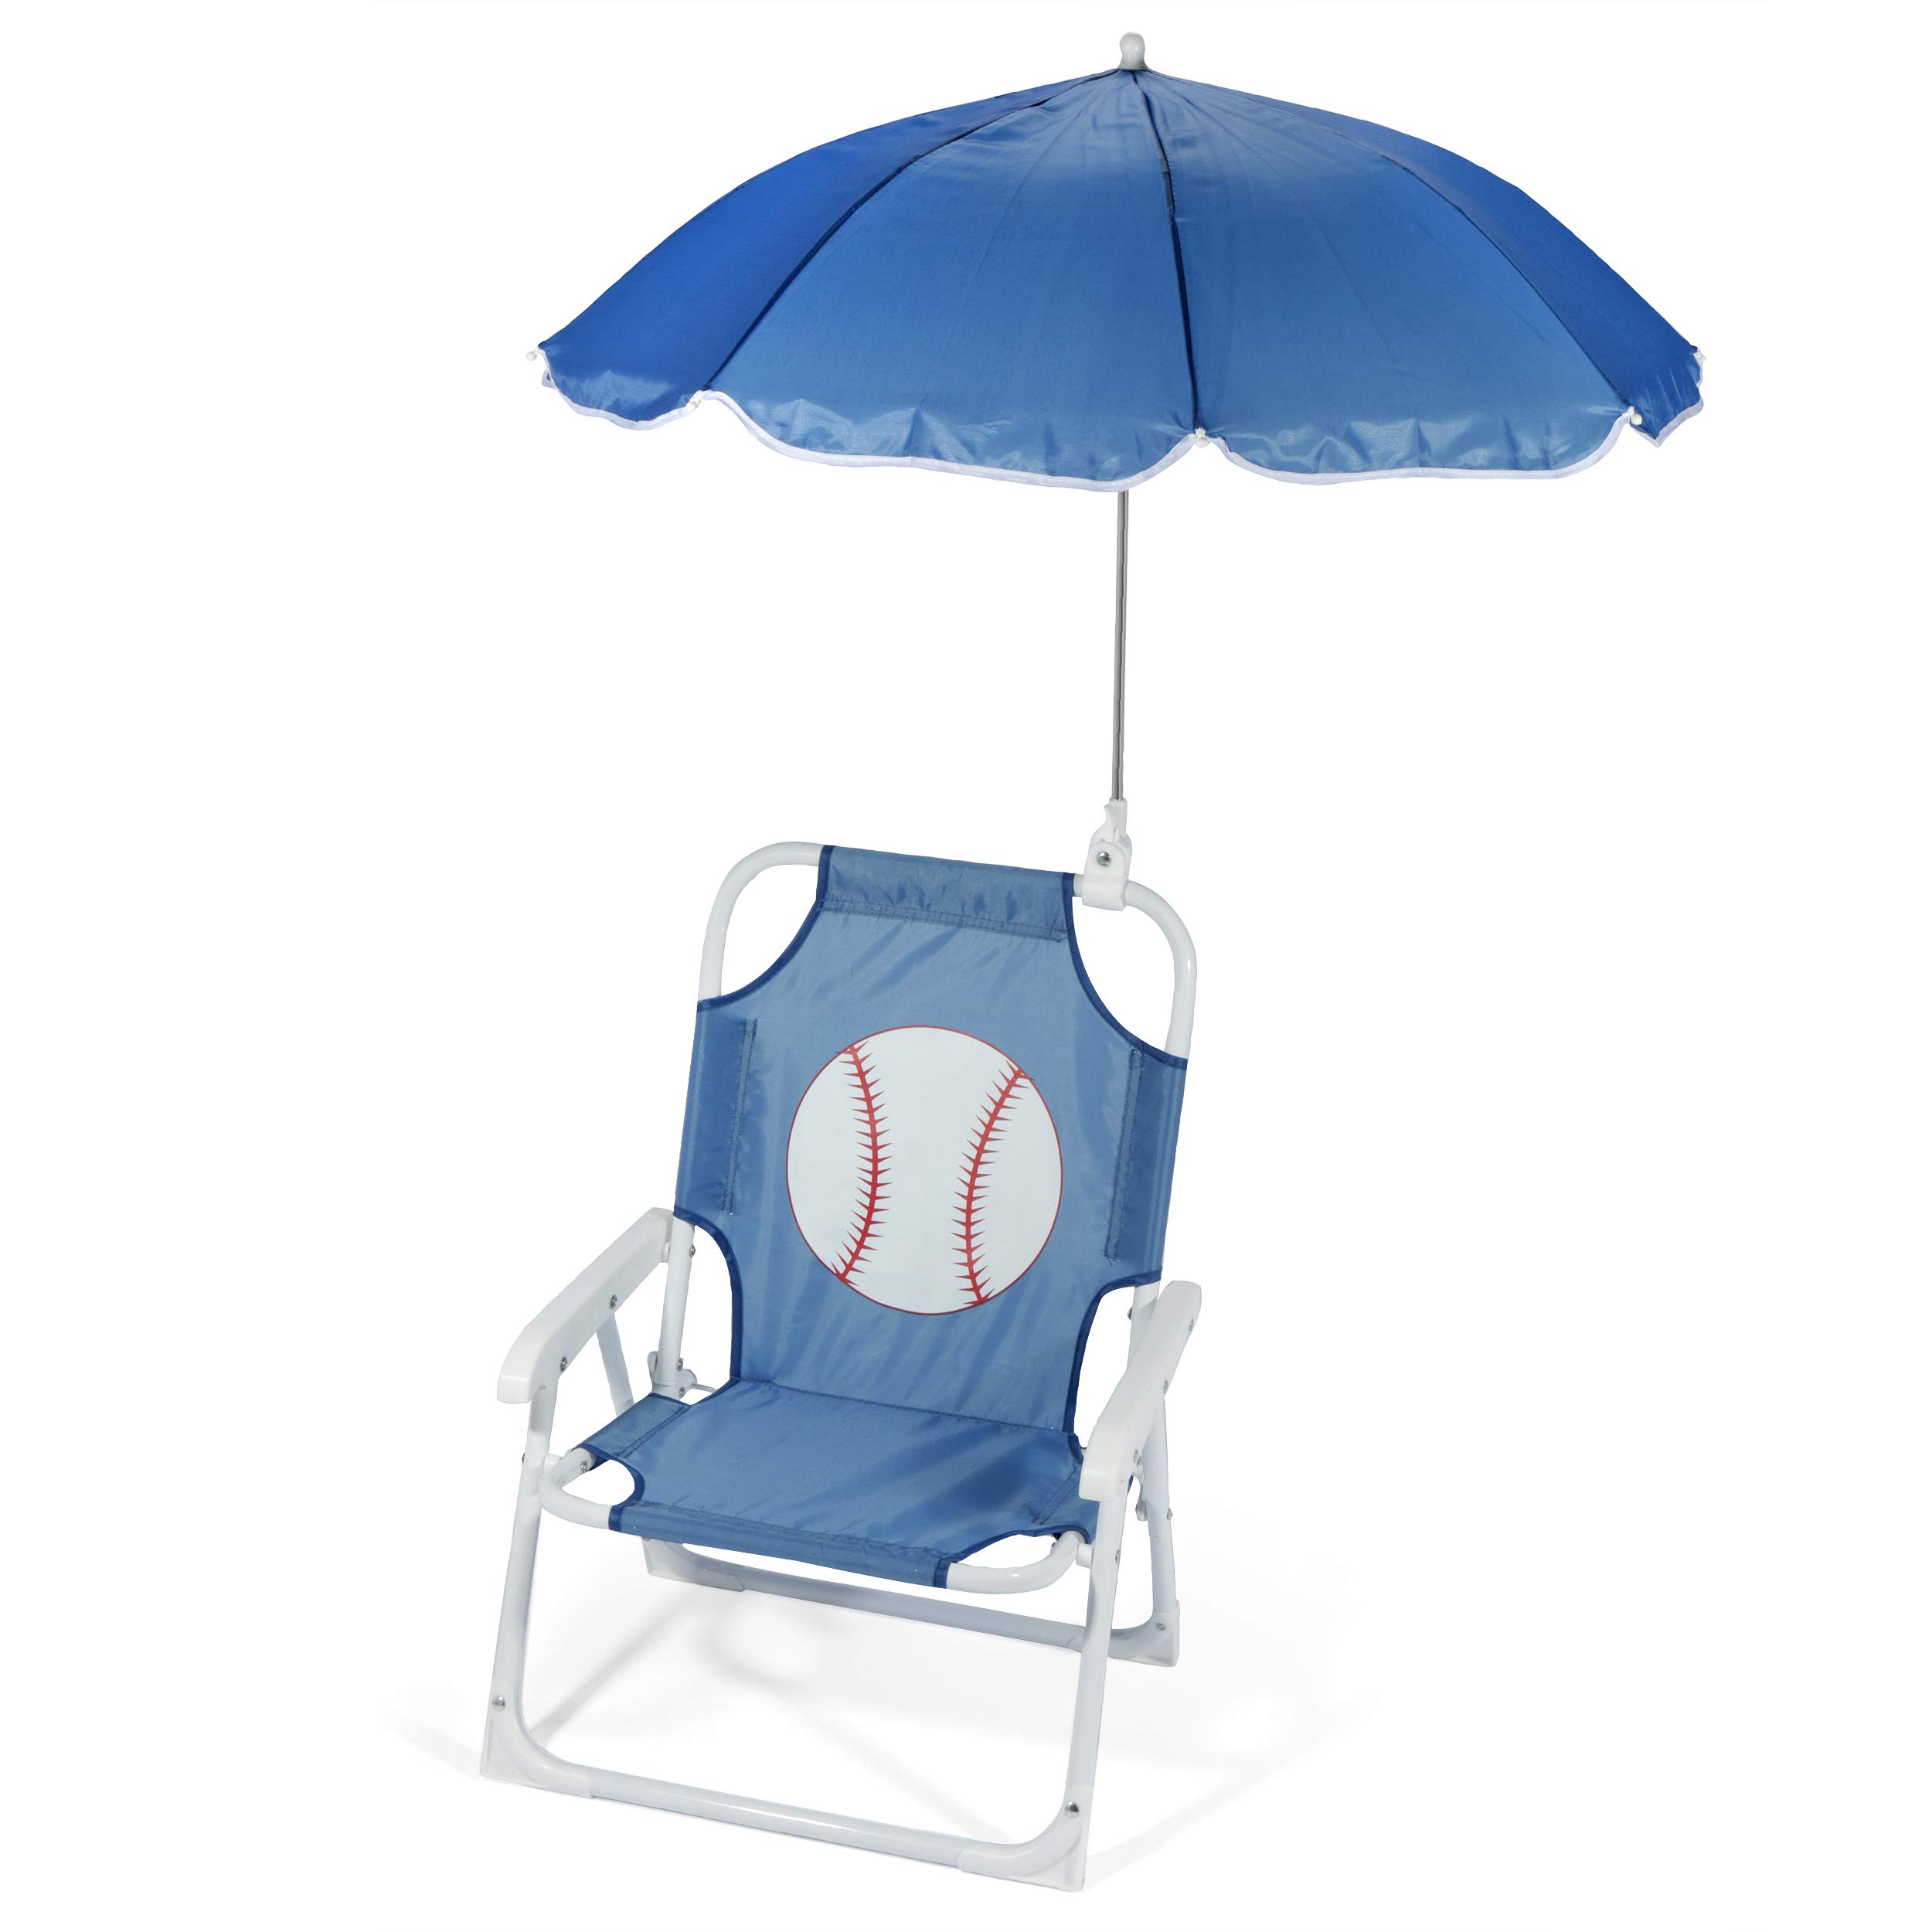 Heritage Kids Outdoor Beach Chair for Kids with Clip on Umbrella, Blue Baseball